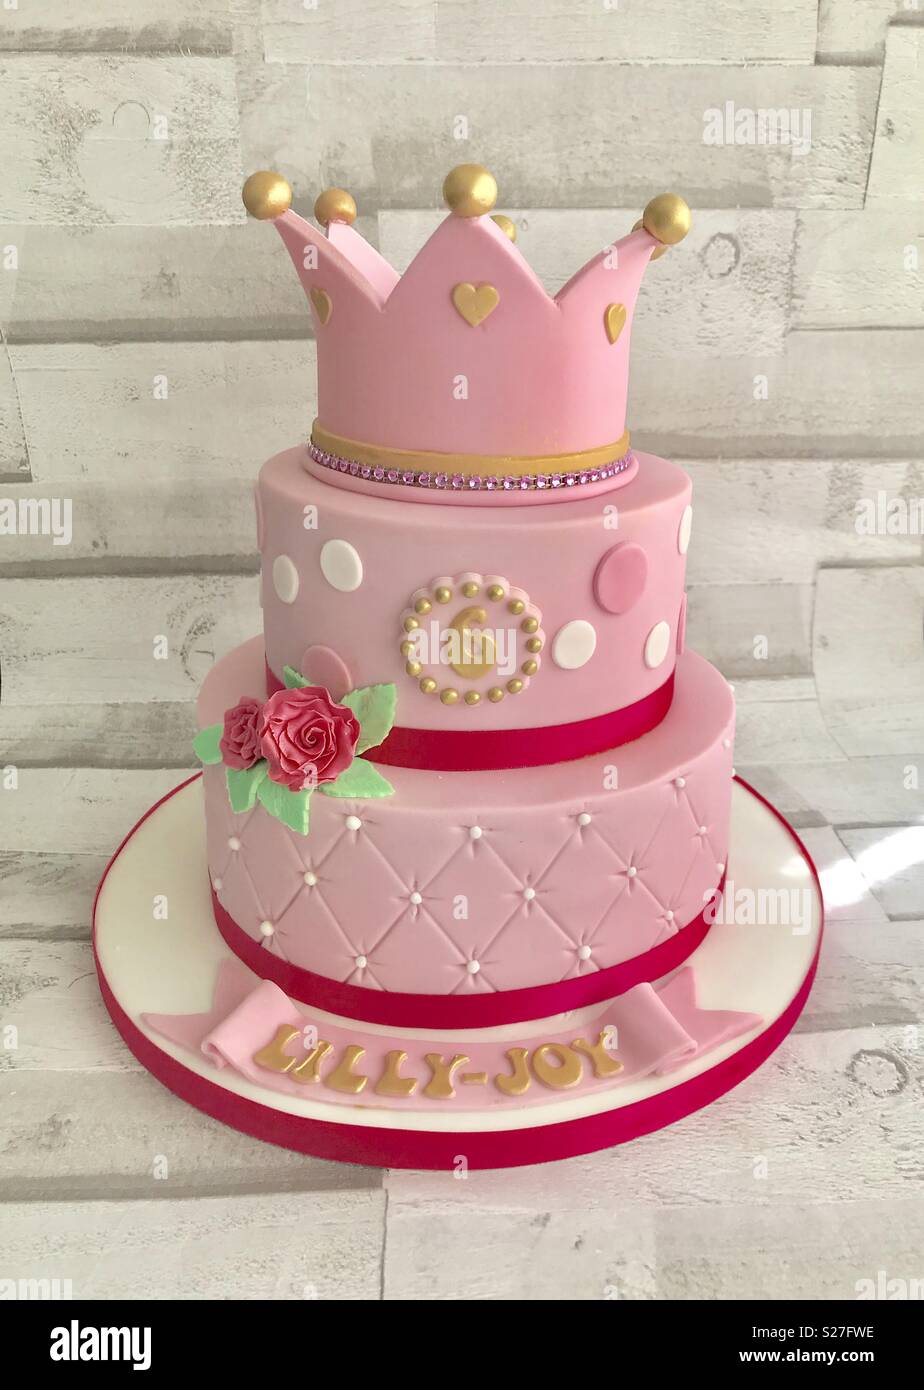 A cake fit for a princess Stock Photo - Alamy